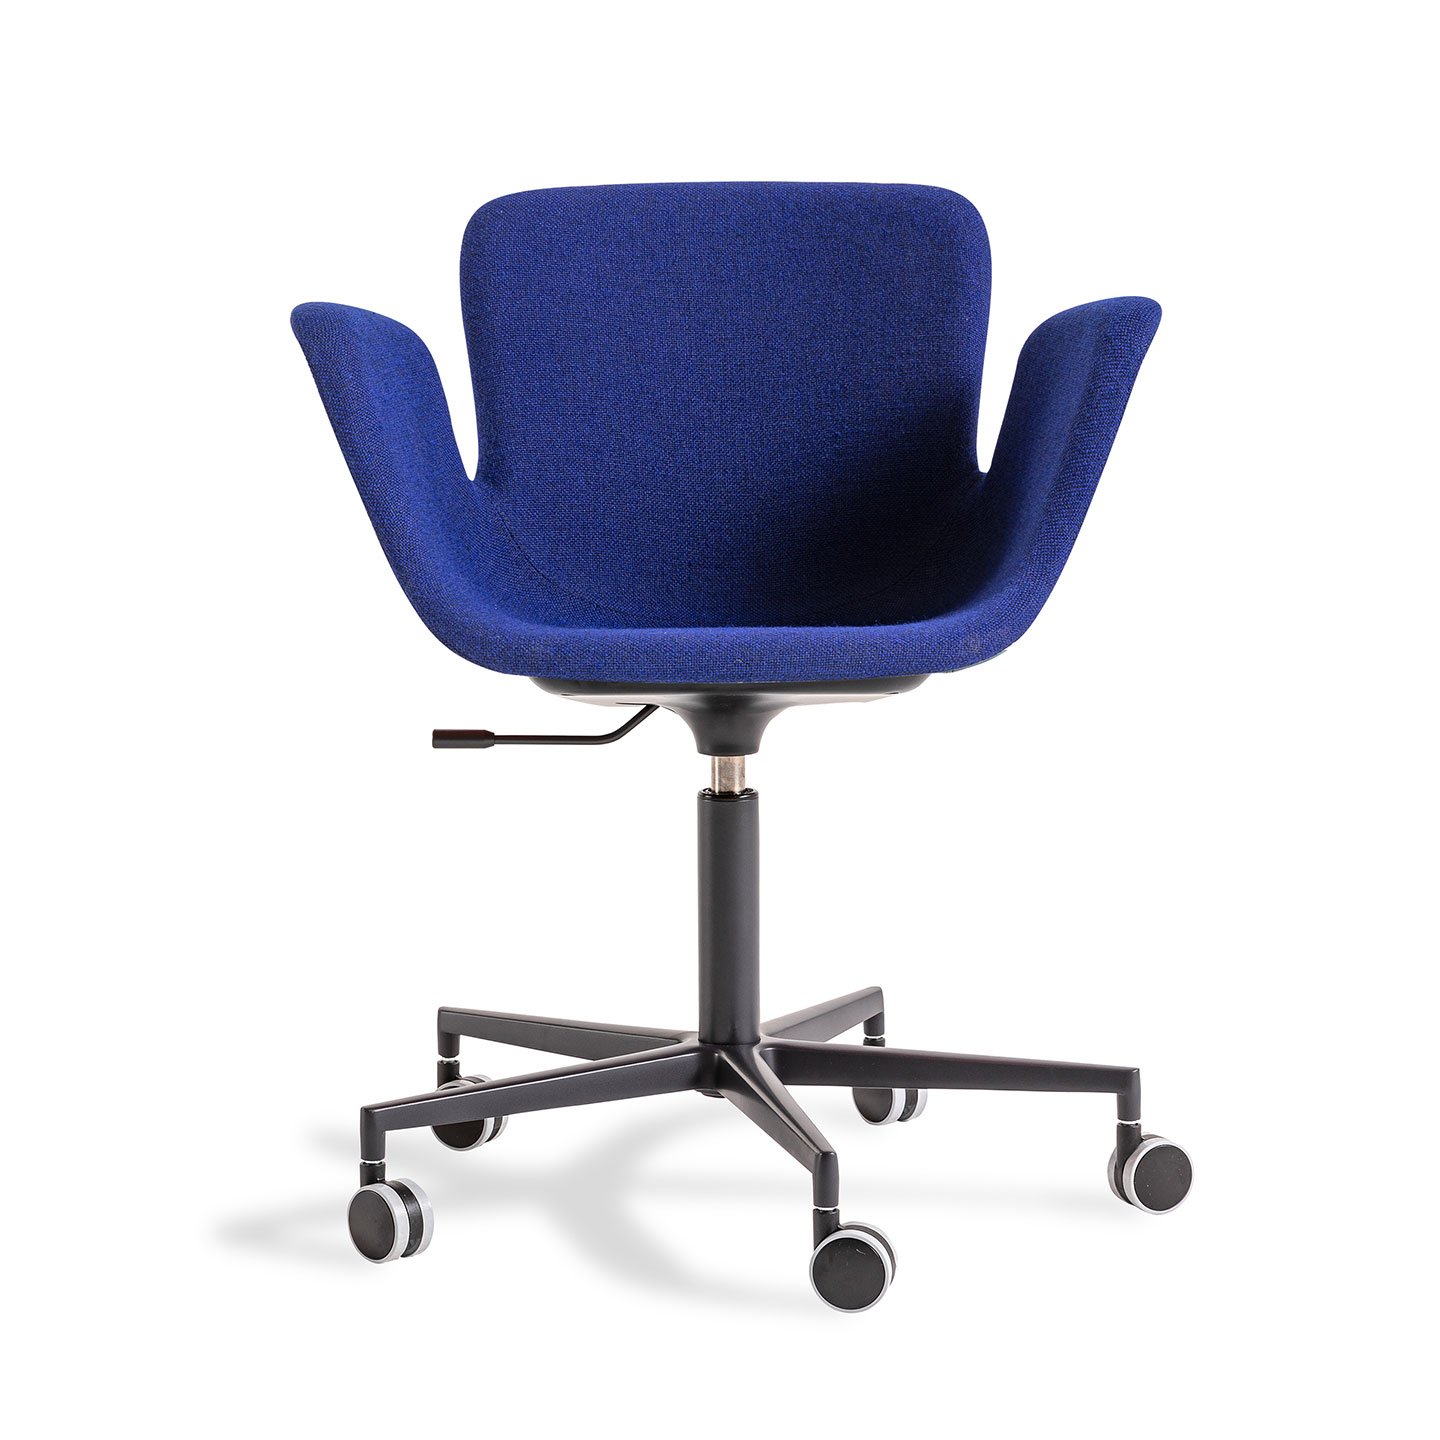 Haworth Juli Soft chair wirh swivel base and wheels in electric blue upholstery